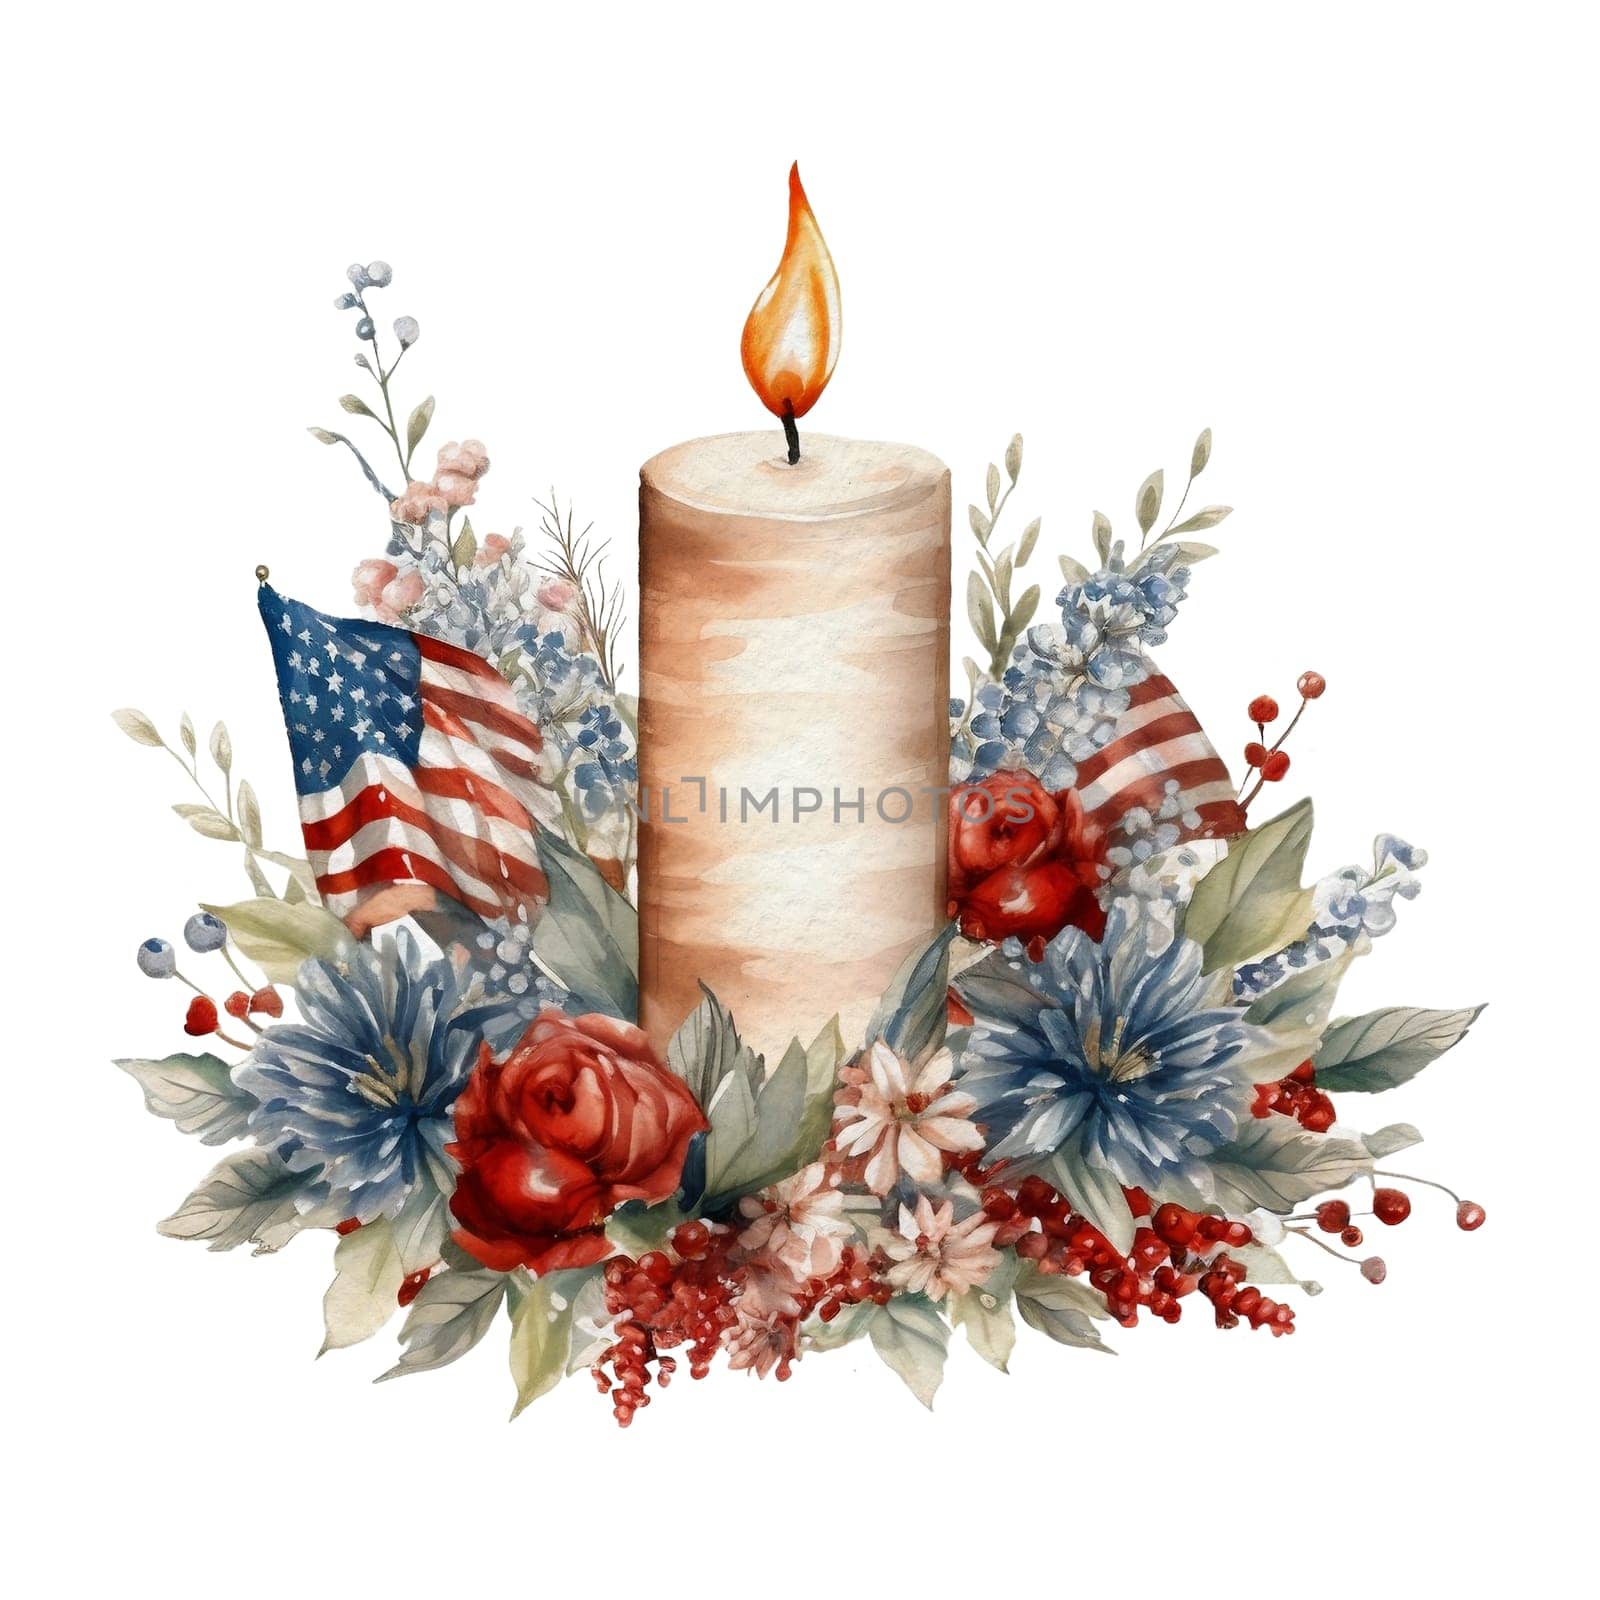 Watercolor 4th of July Independence Day Candles Flowers Cosy Decoration Illustration Clipart by Skyecreativestudio